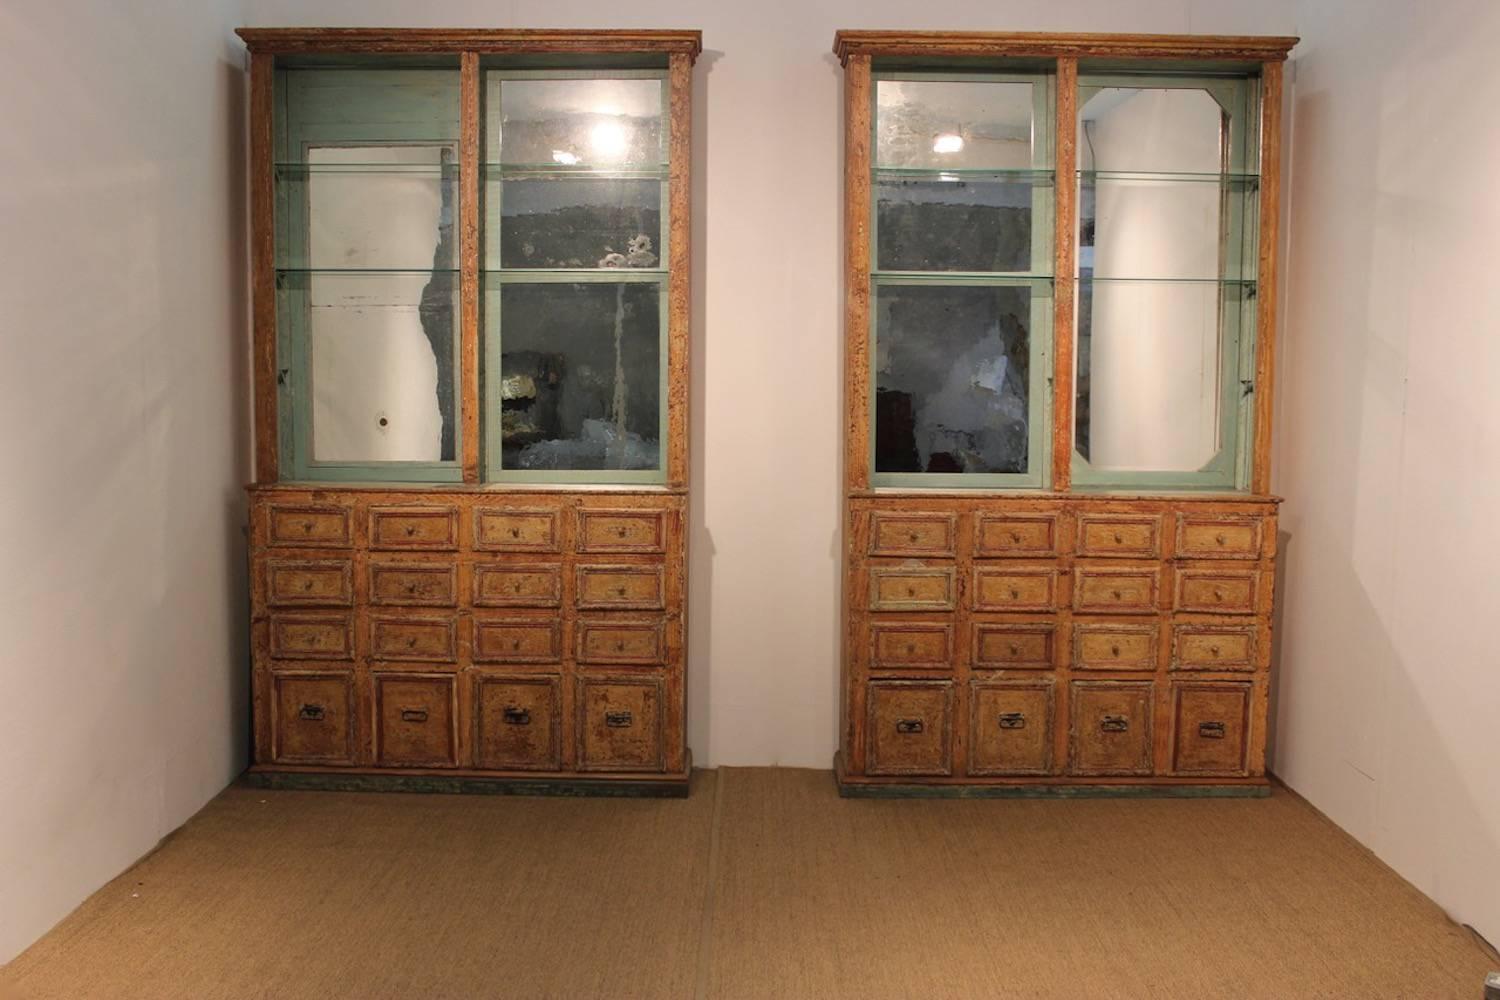 An unusual and large pair of Spanish display cabinets retaining their original paint, with mercury glass lined interiors, each with six shelves above an arrangements of 16 drawers, originally from a patisserie, 19th century, with some later